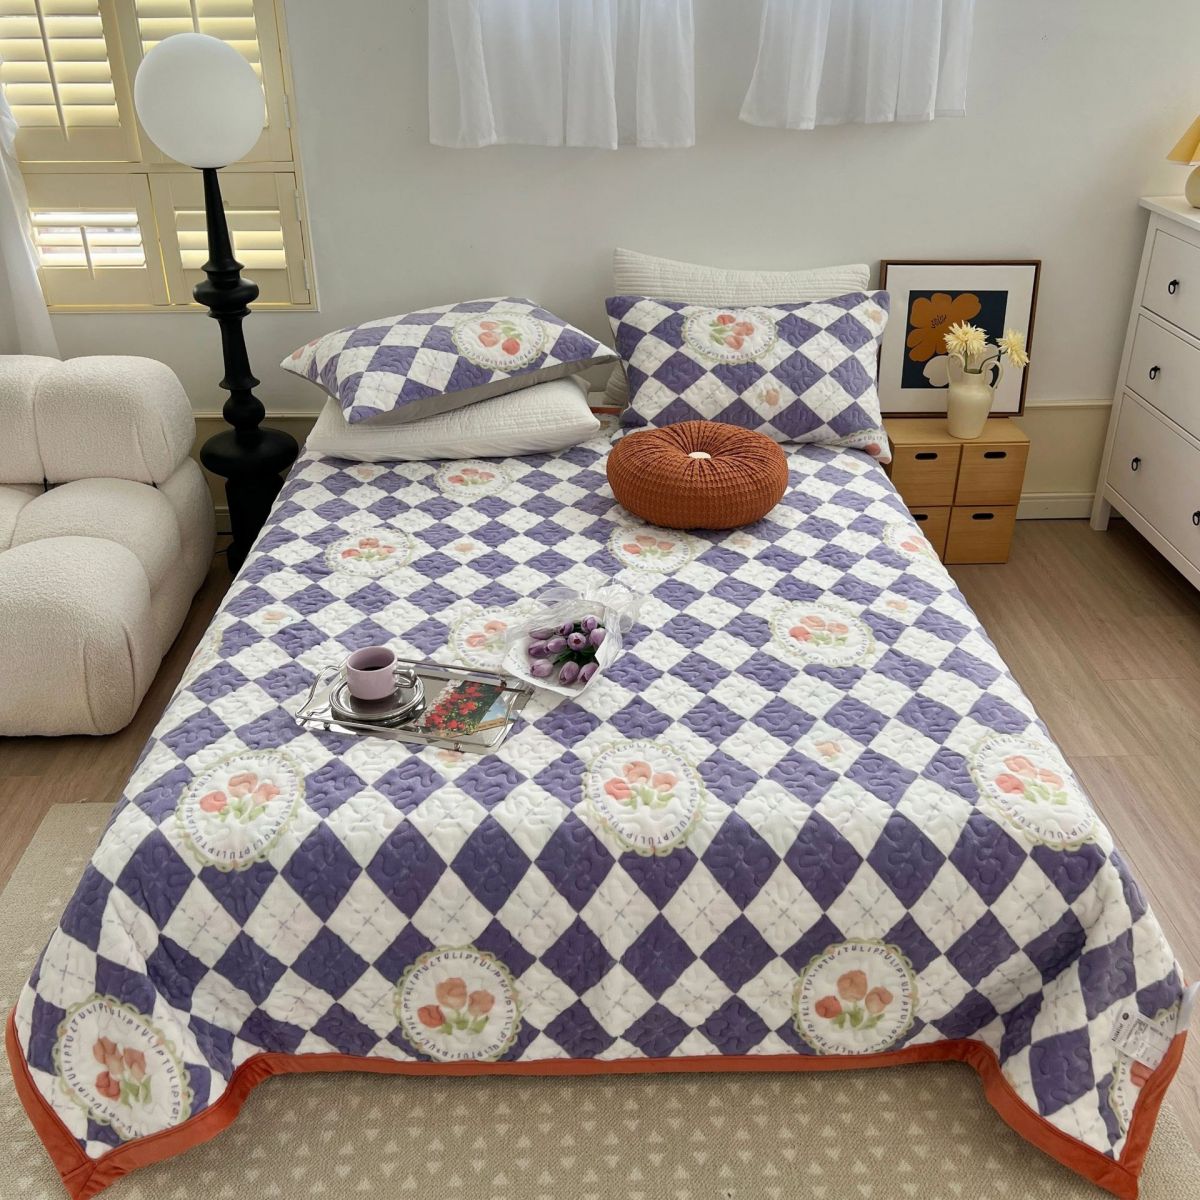 Flannel Bed Sheet Printing Soft Breathable 1-Piece Bed Sheet